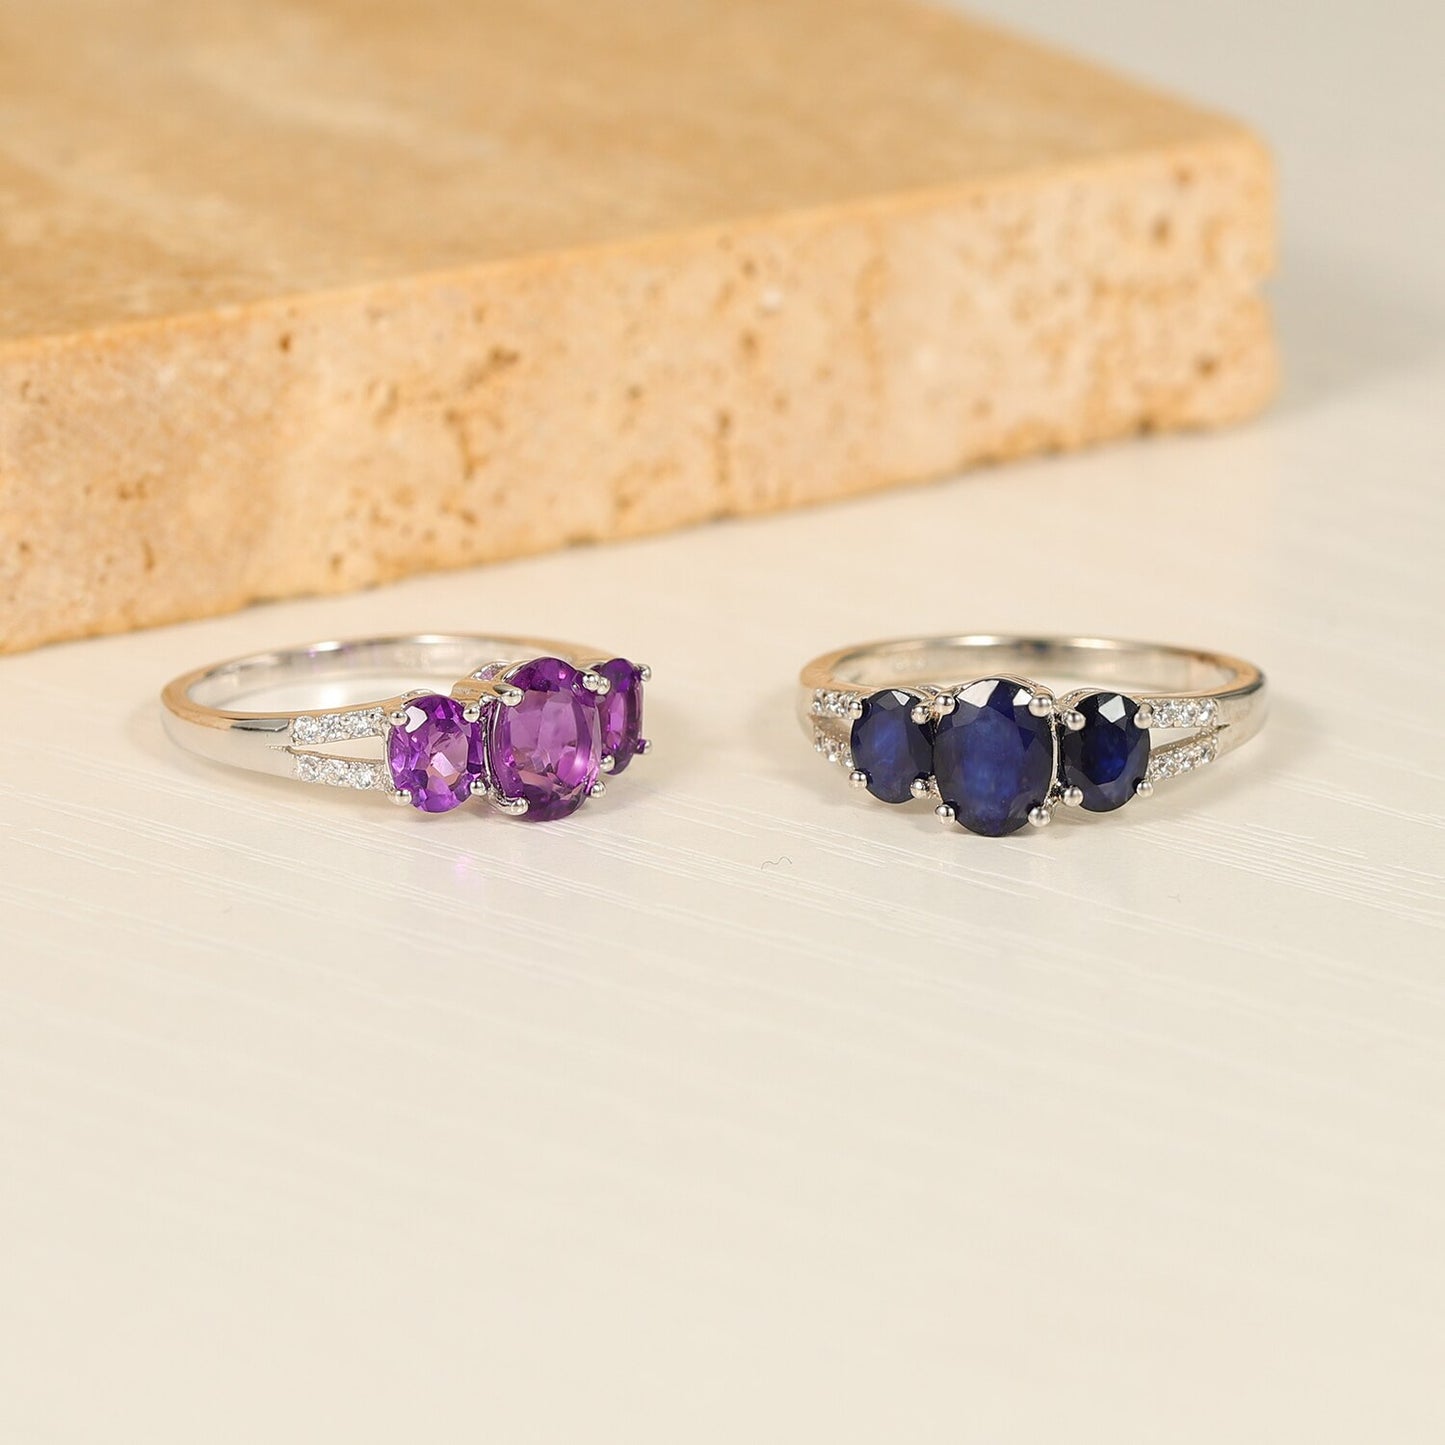 GEM&#39;S BALLET Sapphire Gemstone Rings Natural Blue Sapphire Three Stone Engagement Rings in 925 Sterling Silver Gift For Her